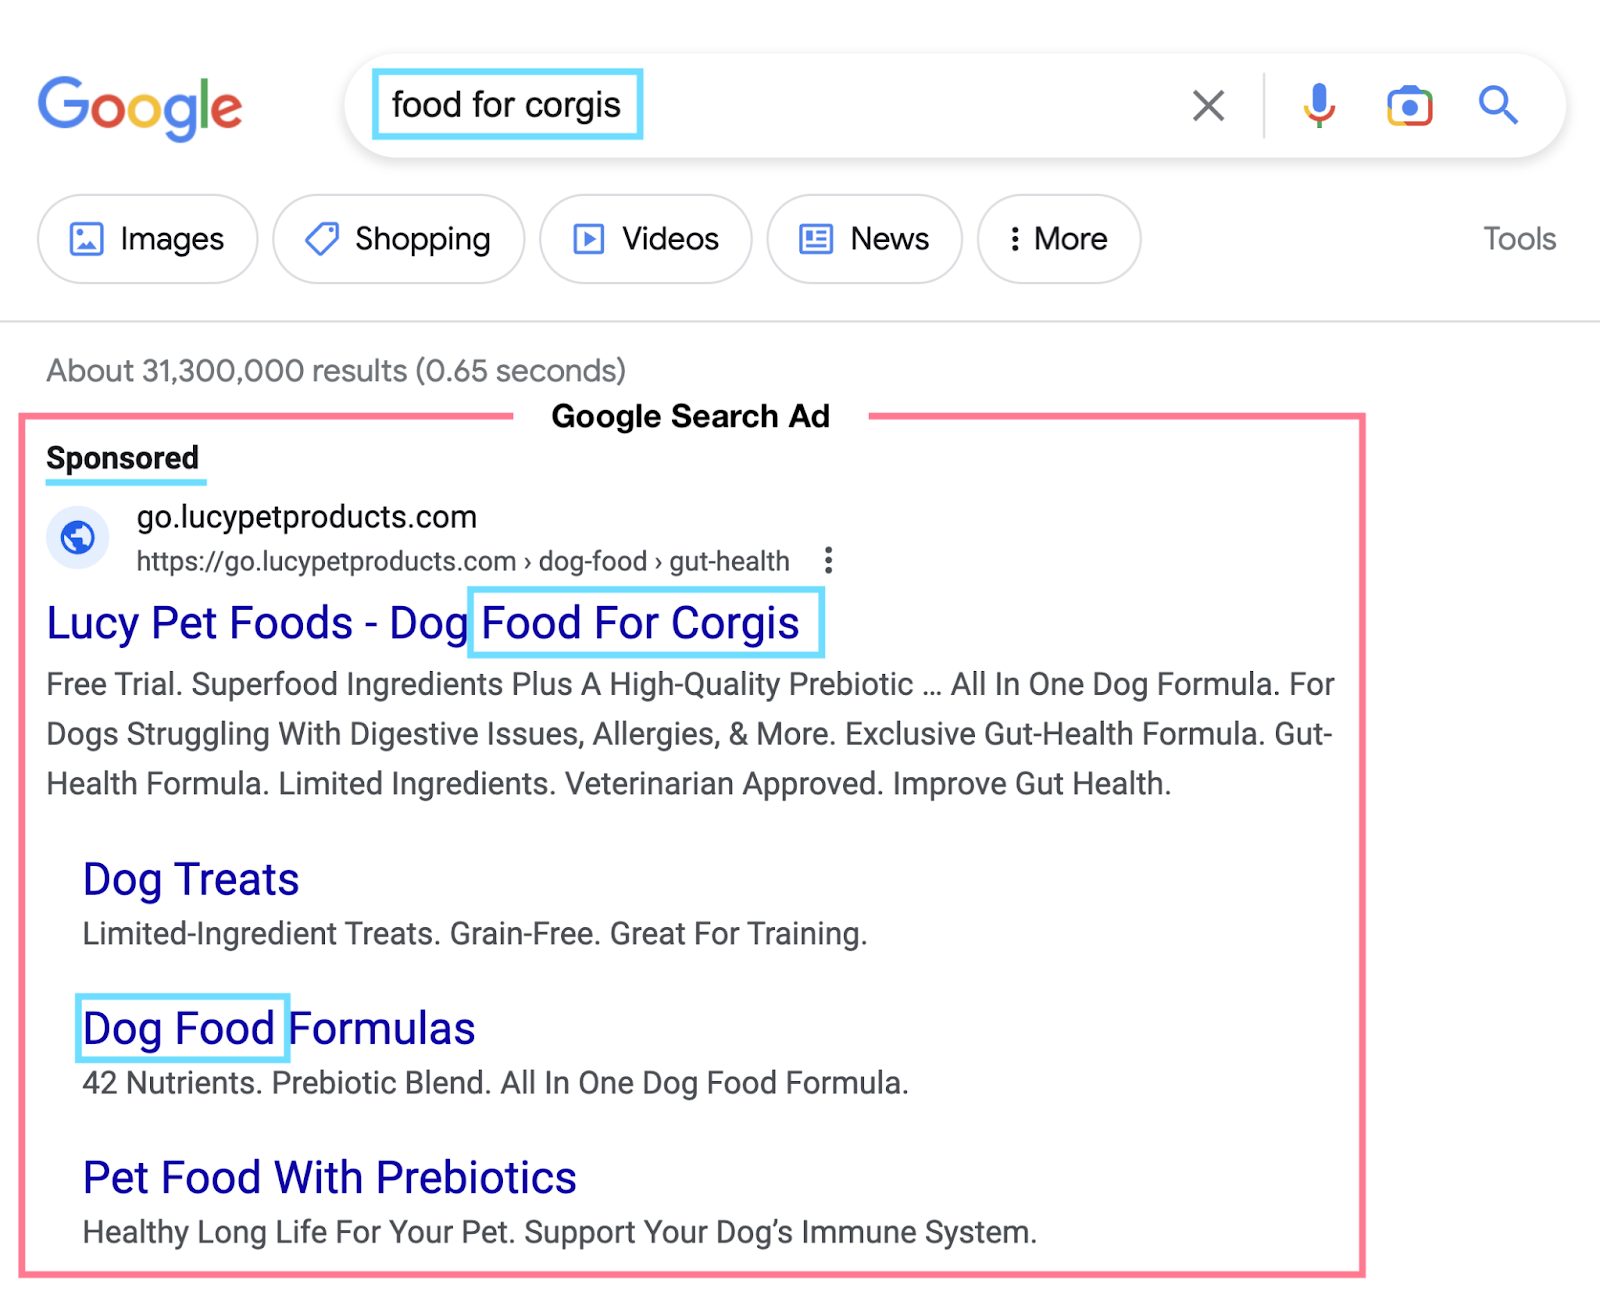 Google Search Ad in SERP